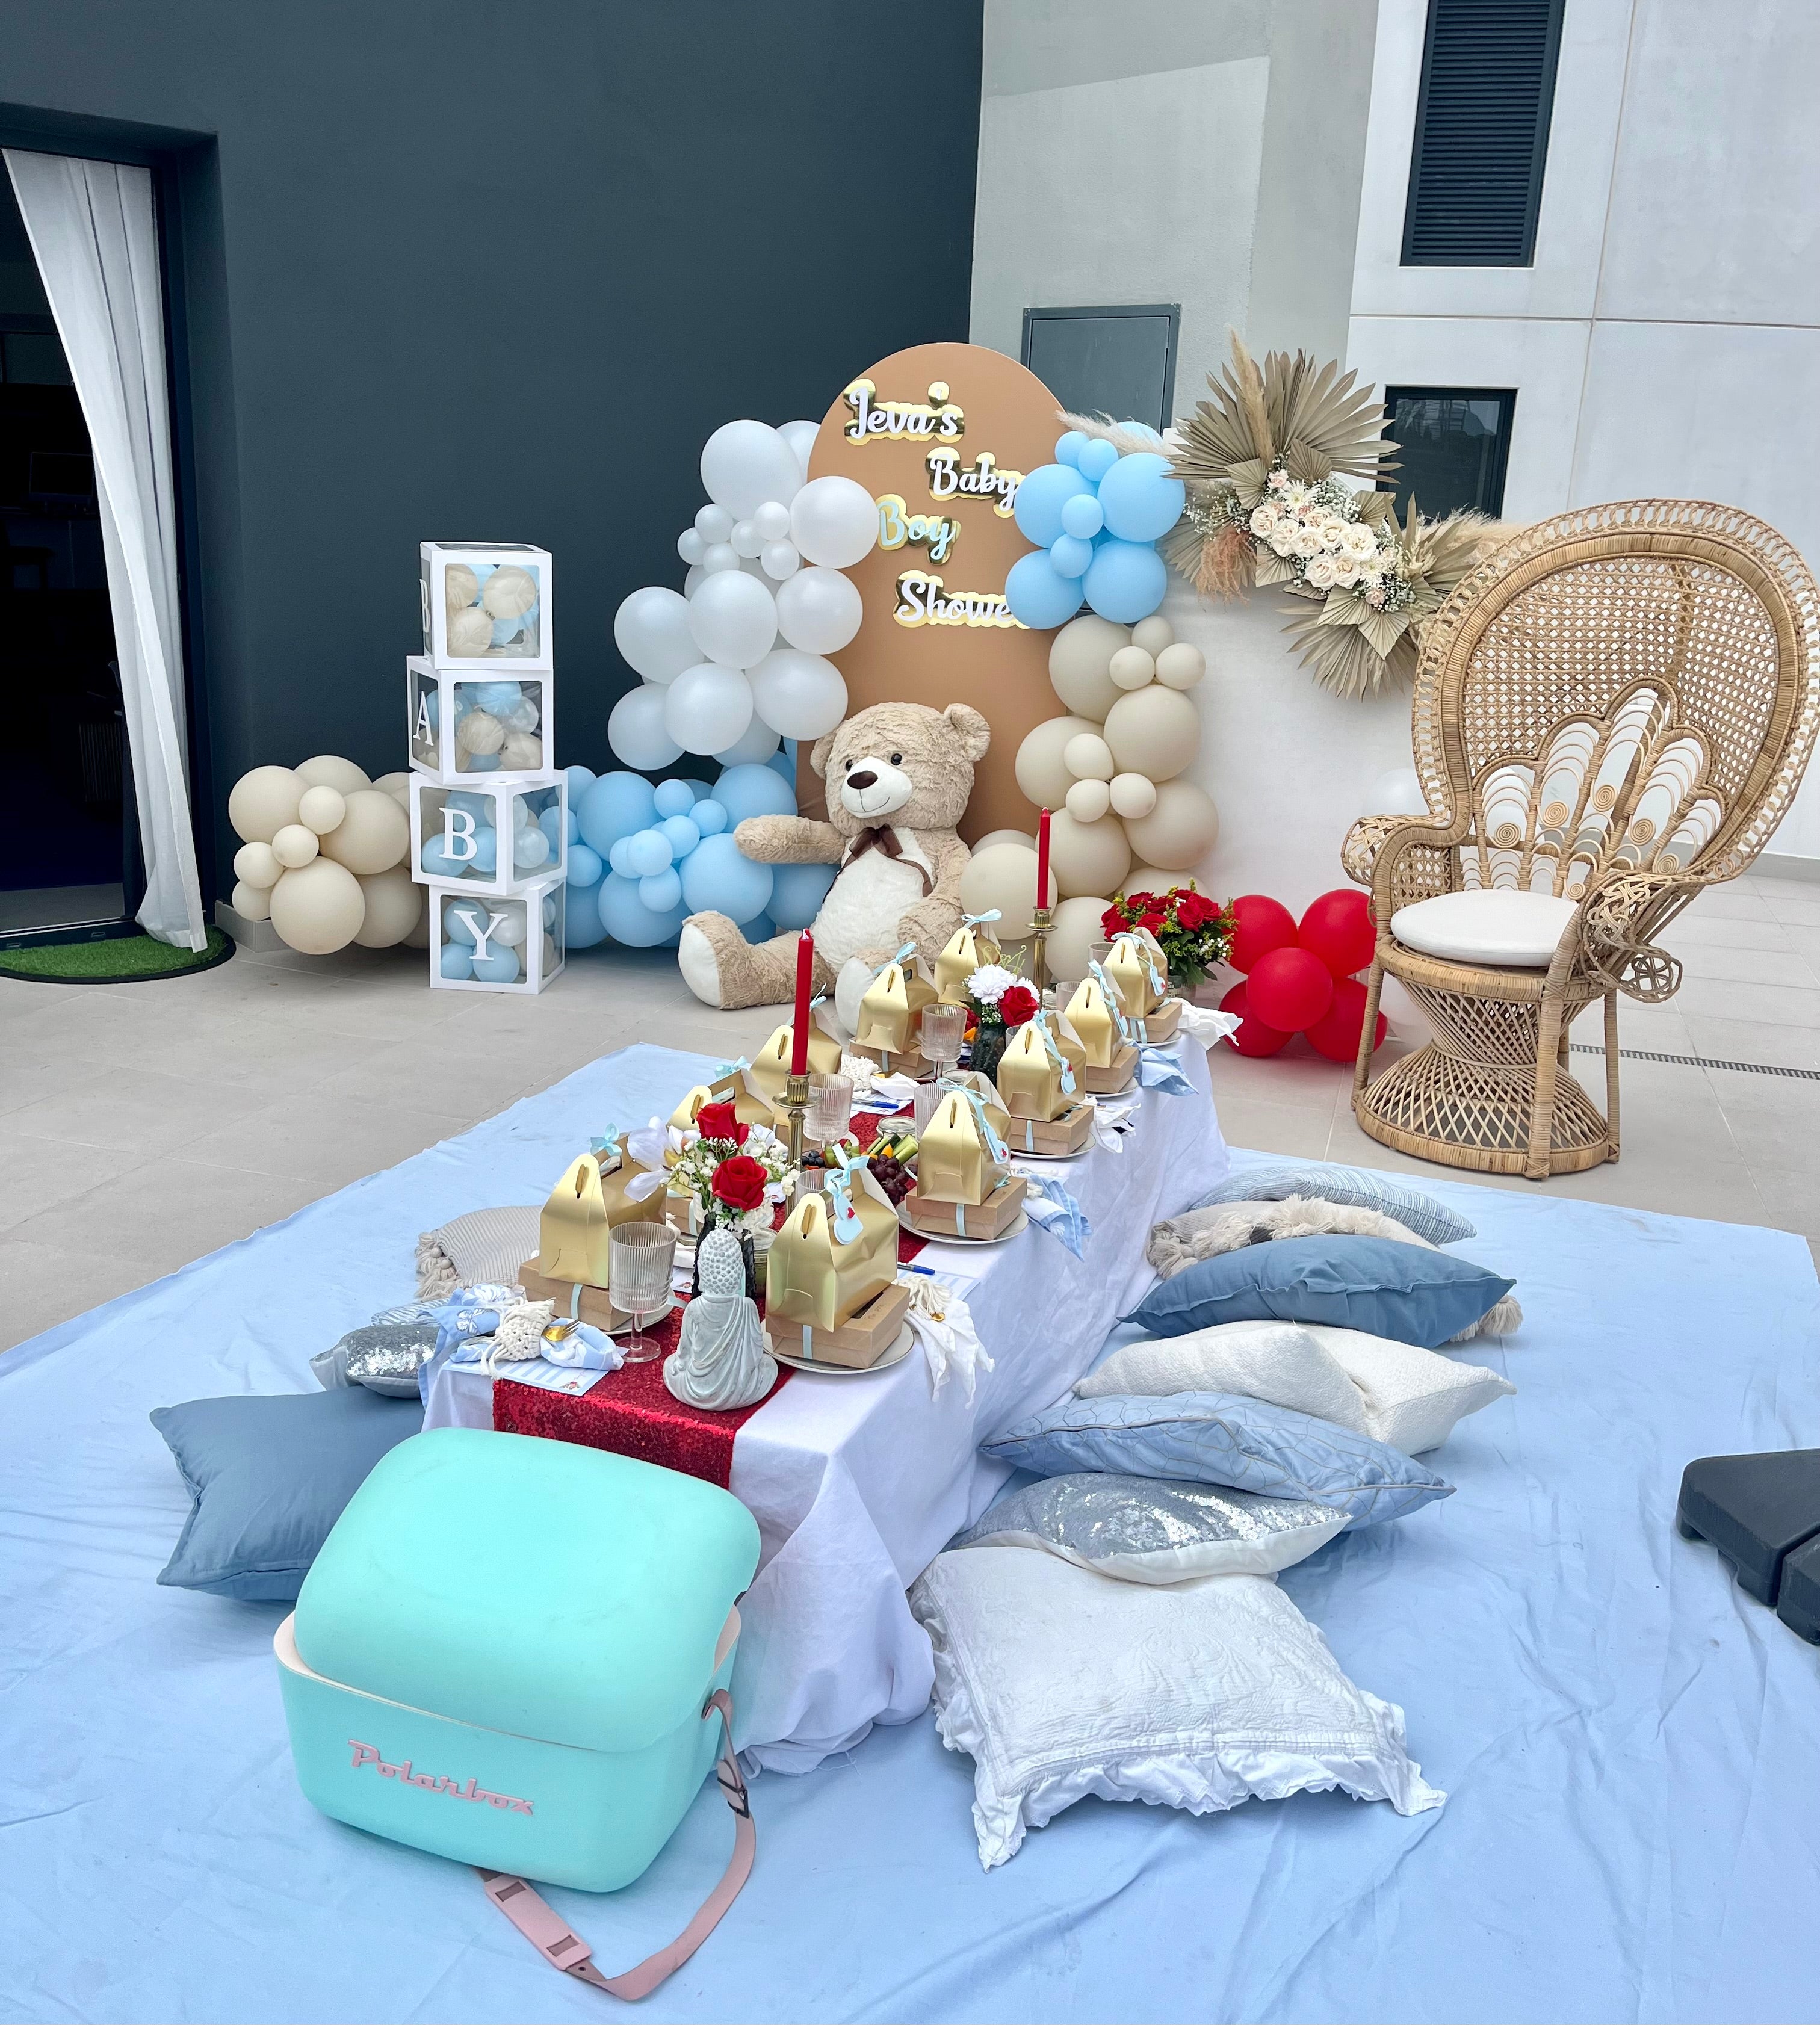 Baby Shower Party Barcelona – Straws 'n Berries Picnics